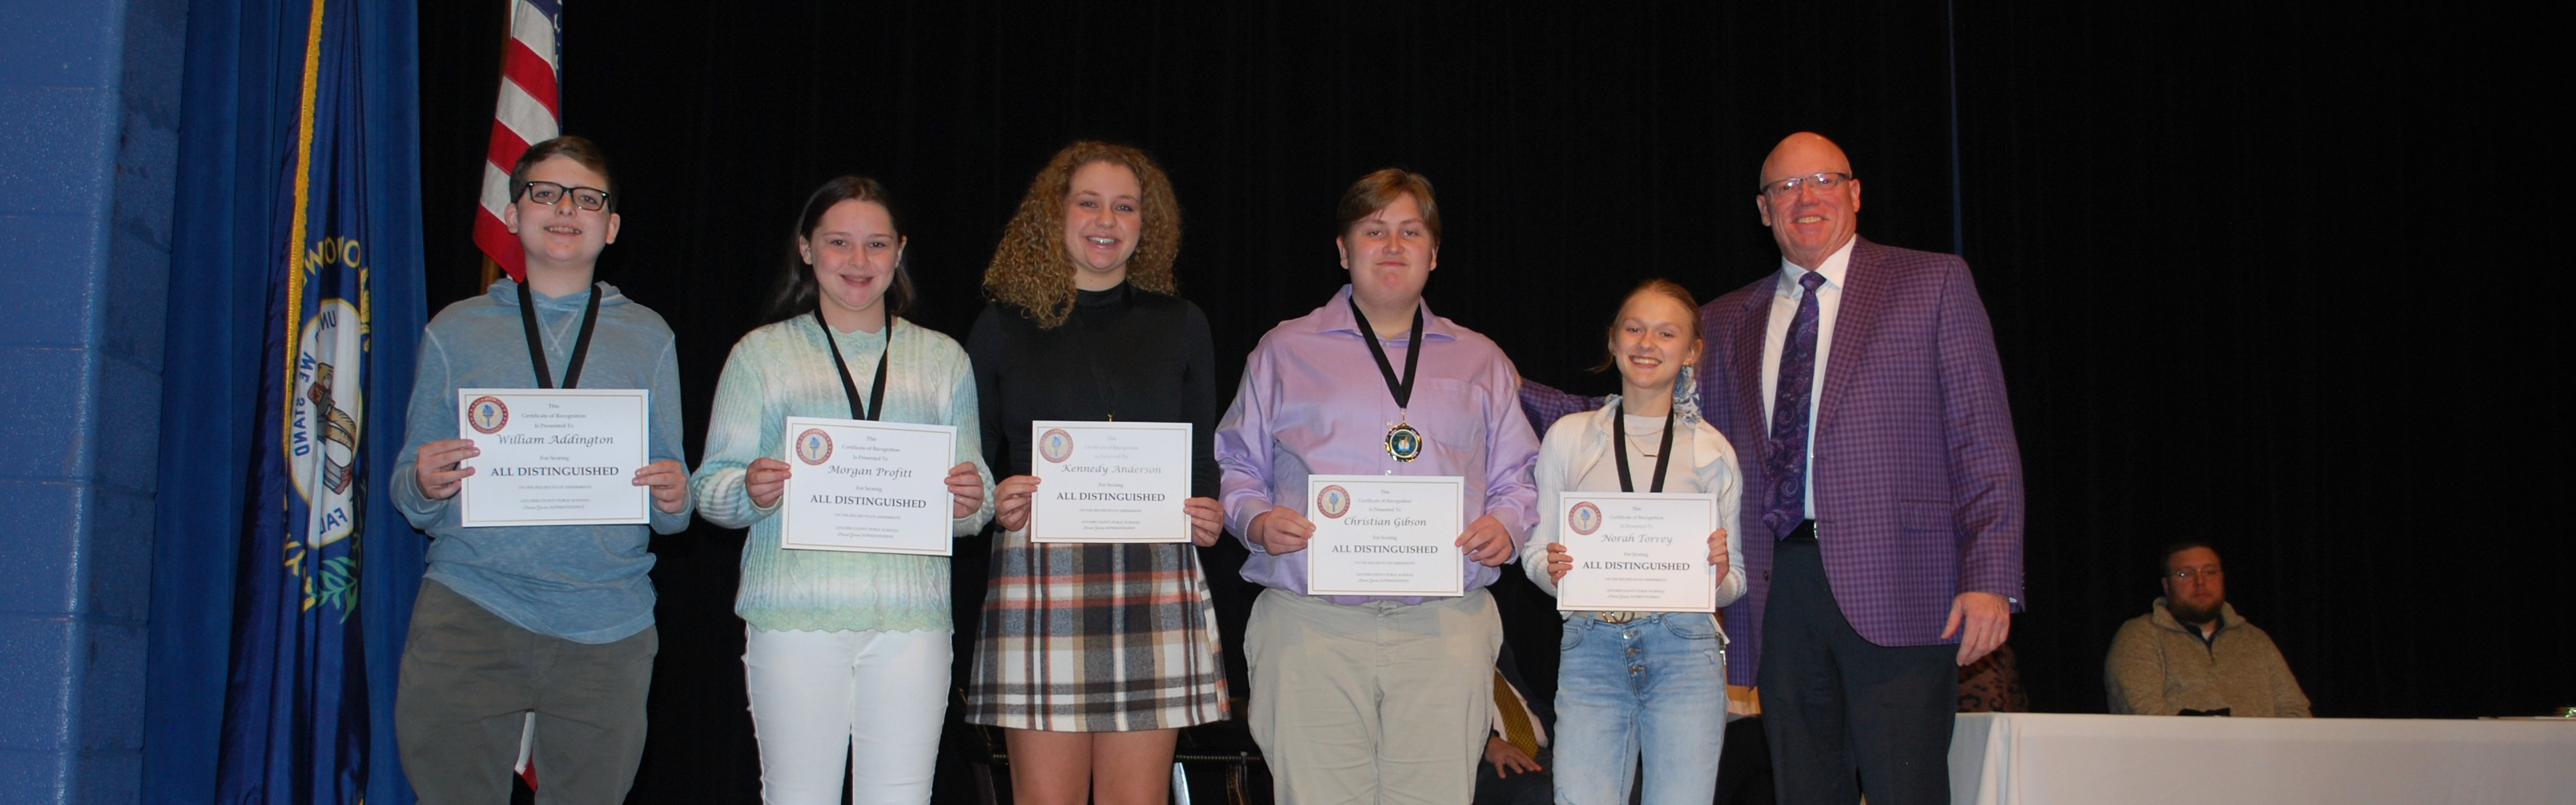 Fleming Neon students receiving all distinguished test awards.